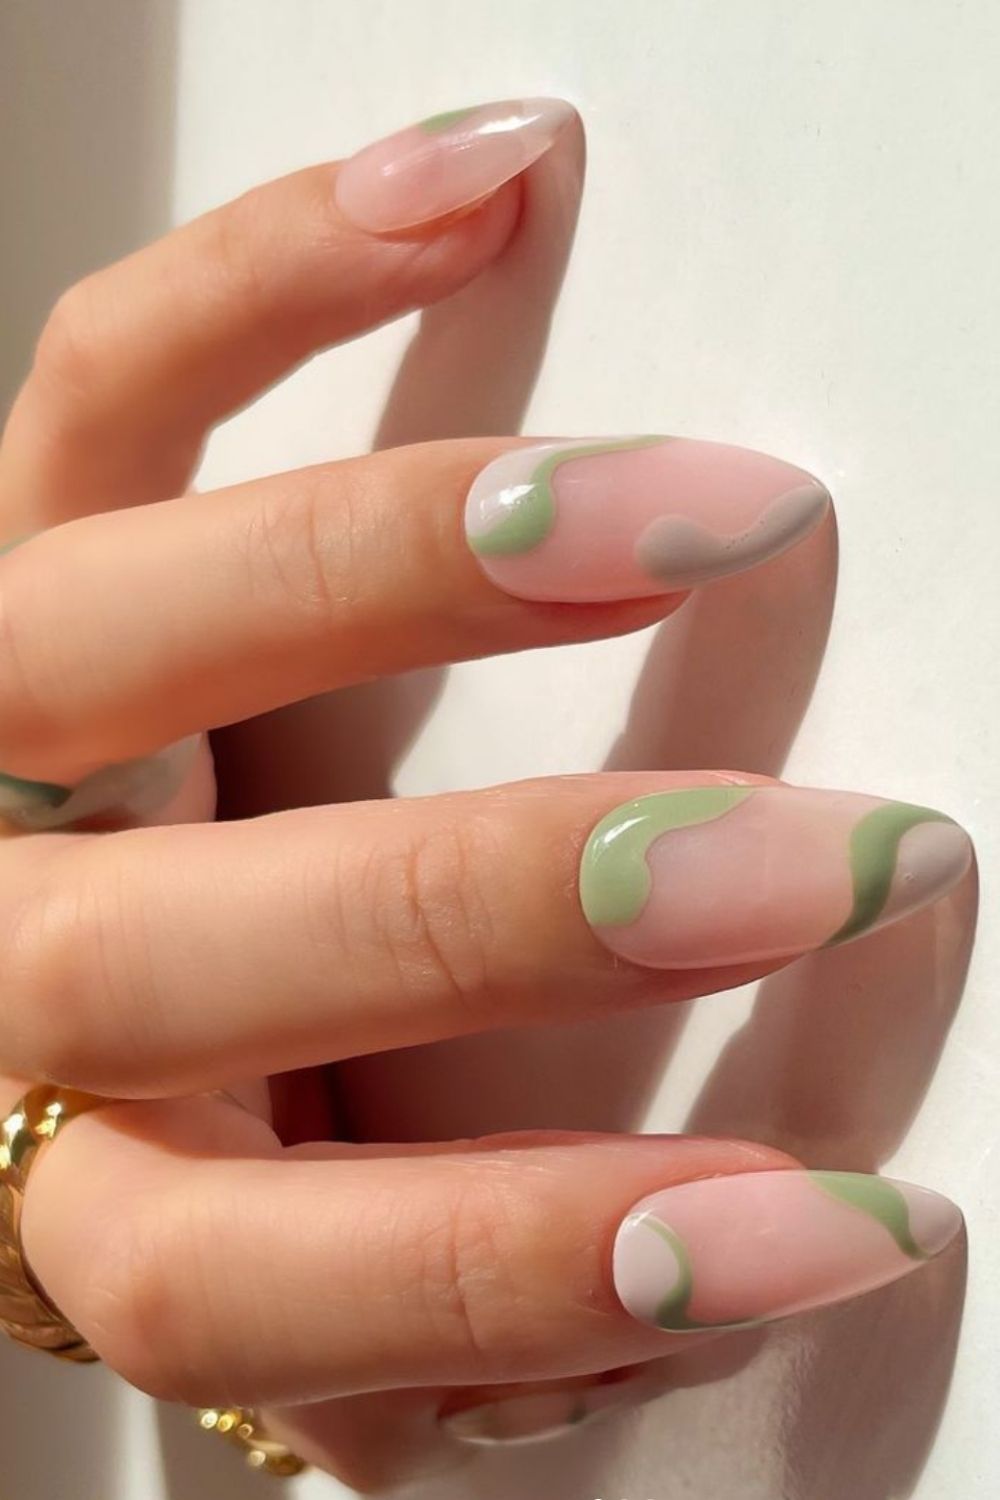 Best Green nail designs to try 2021: neon green, lime green, dark green